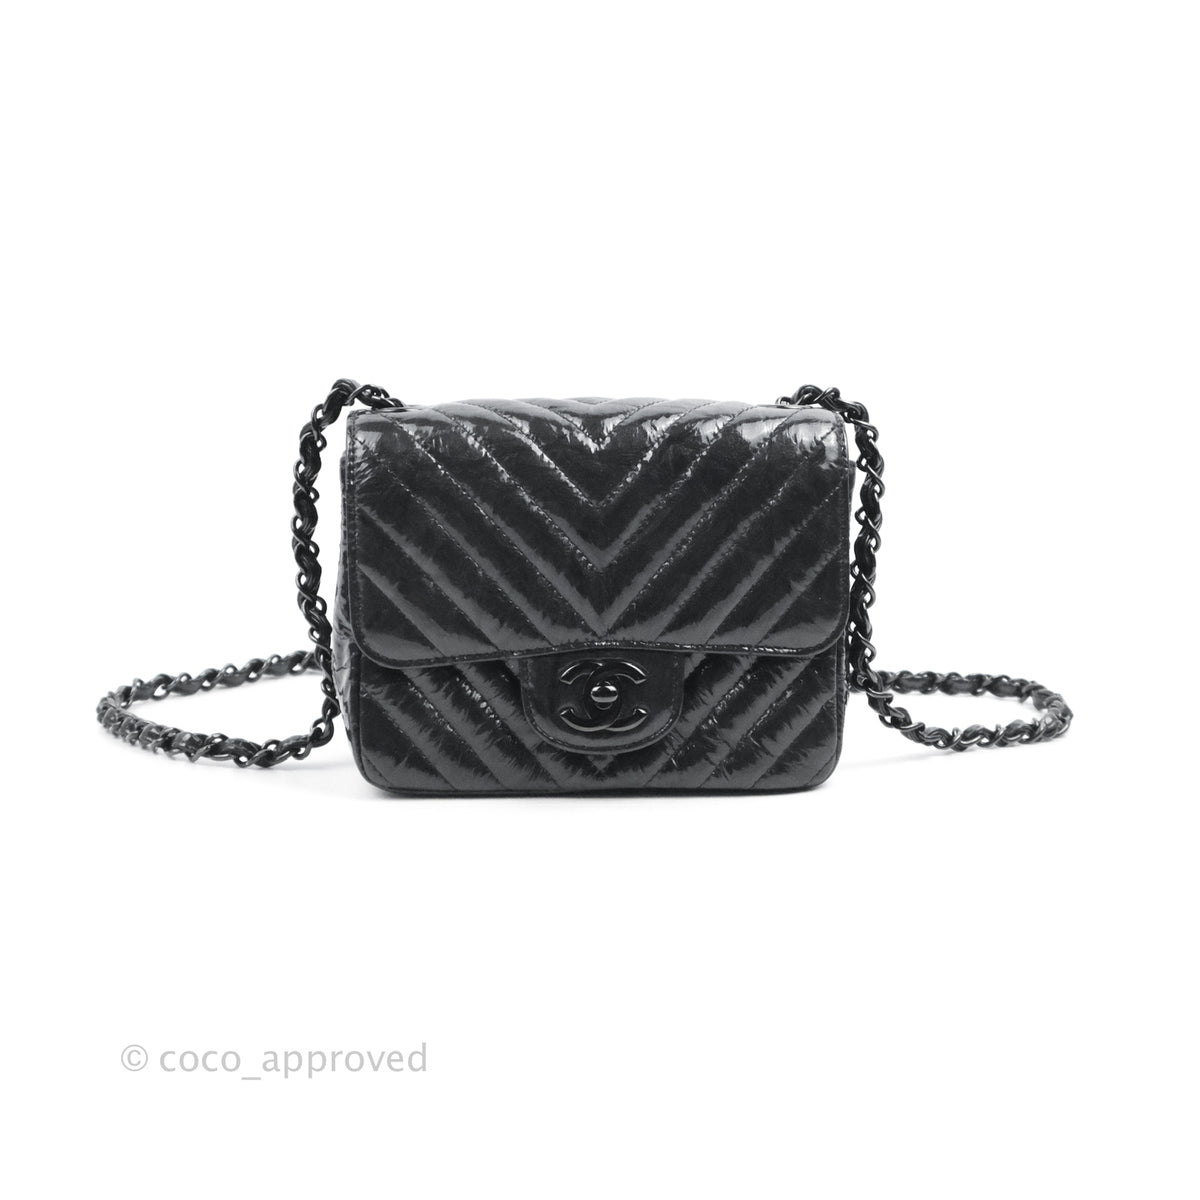 Chanel Chevron Quilted Patent Leather Mini Flap Bag